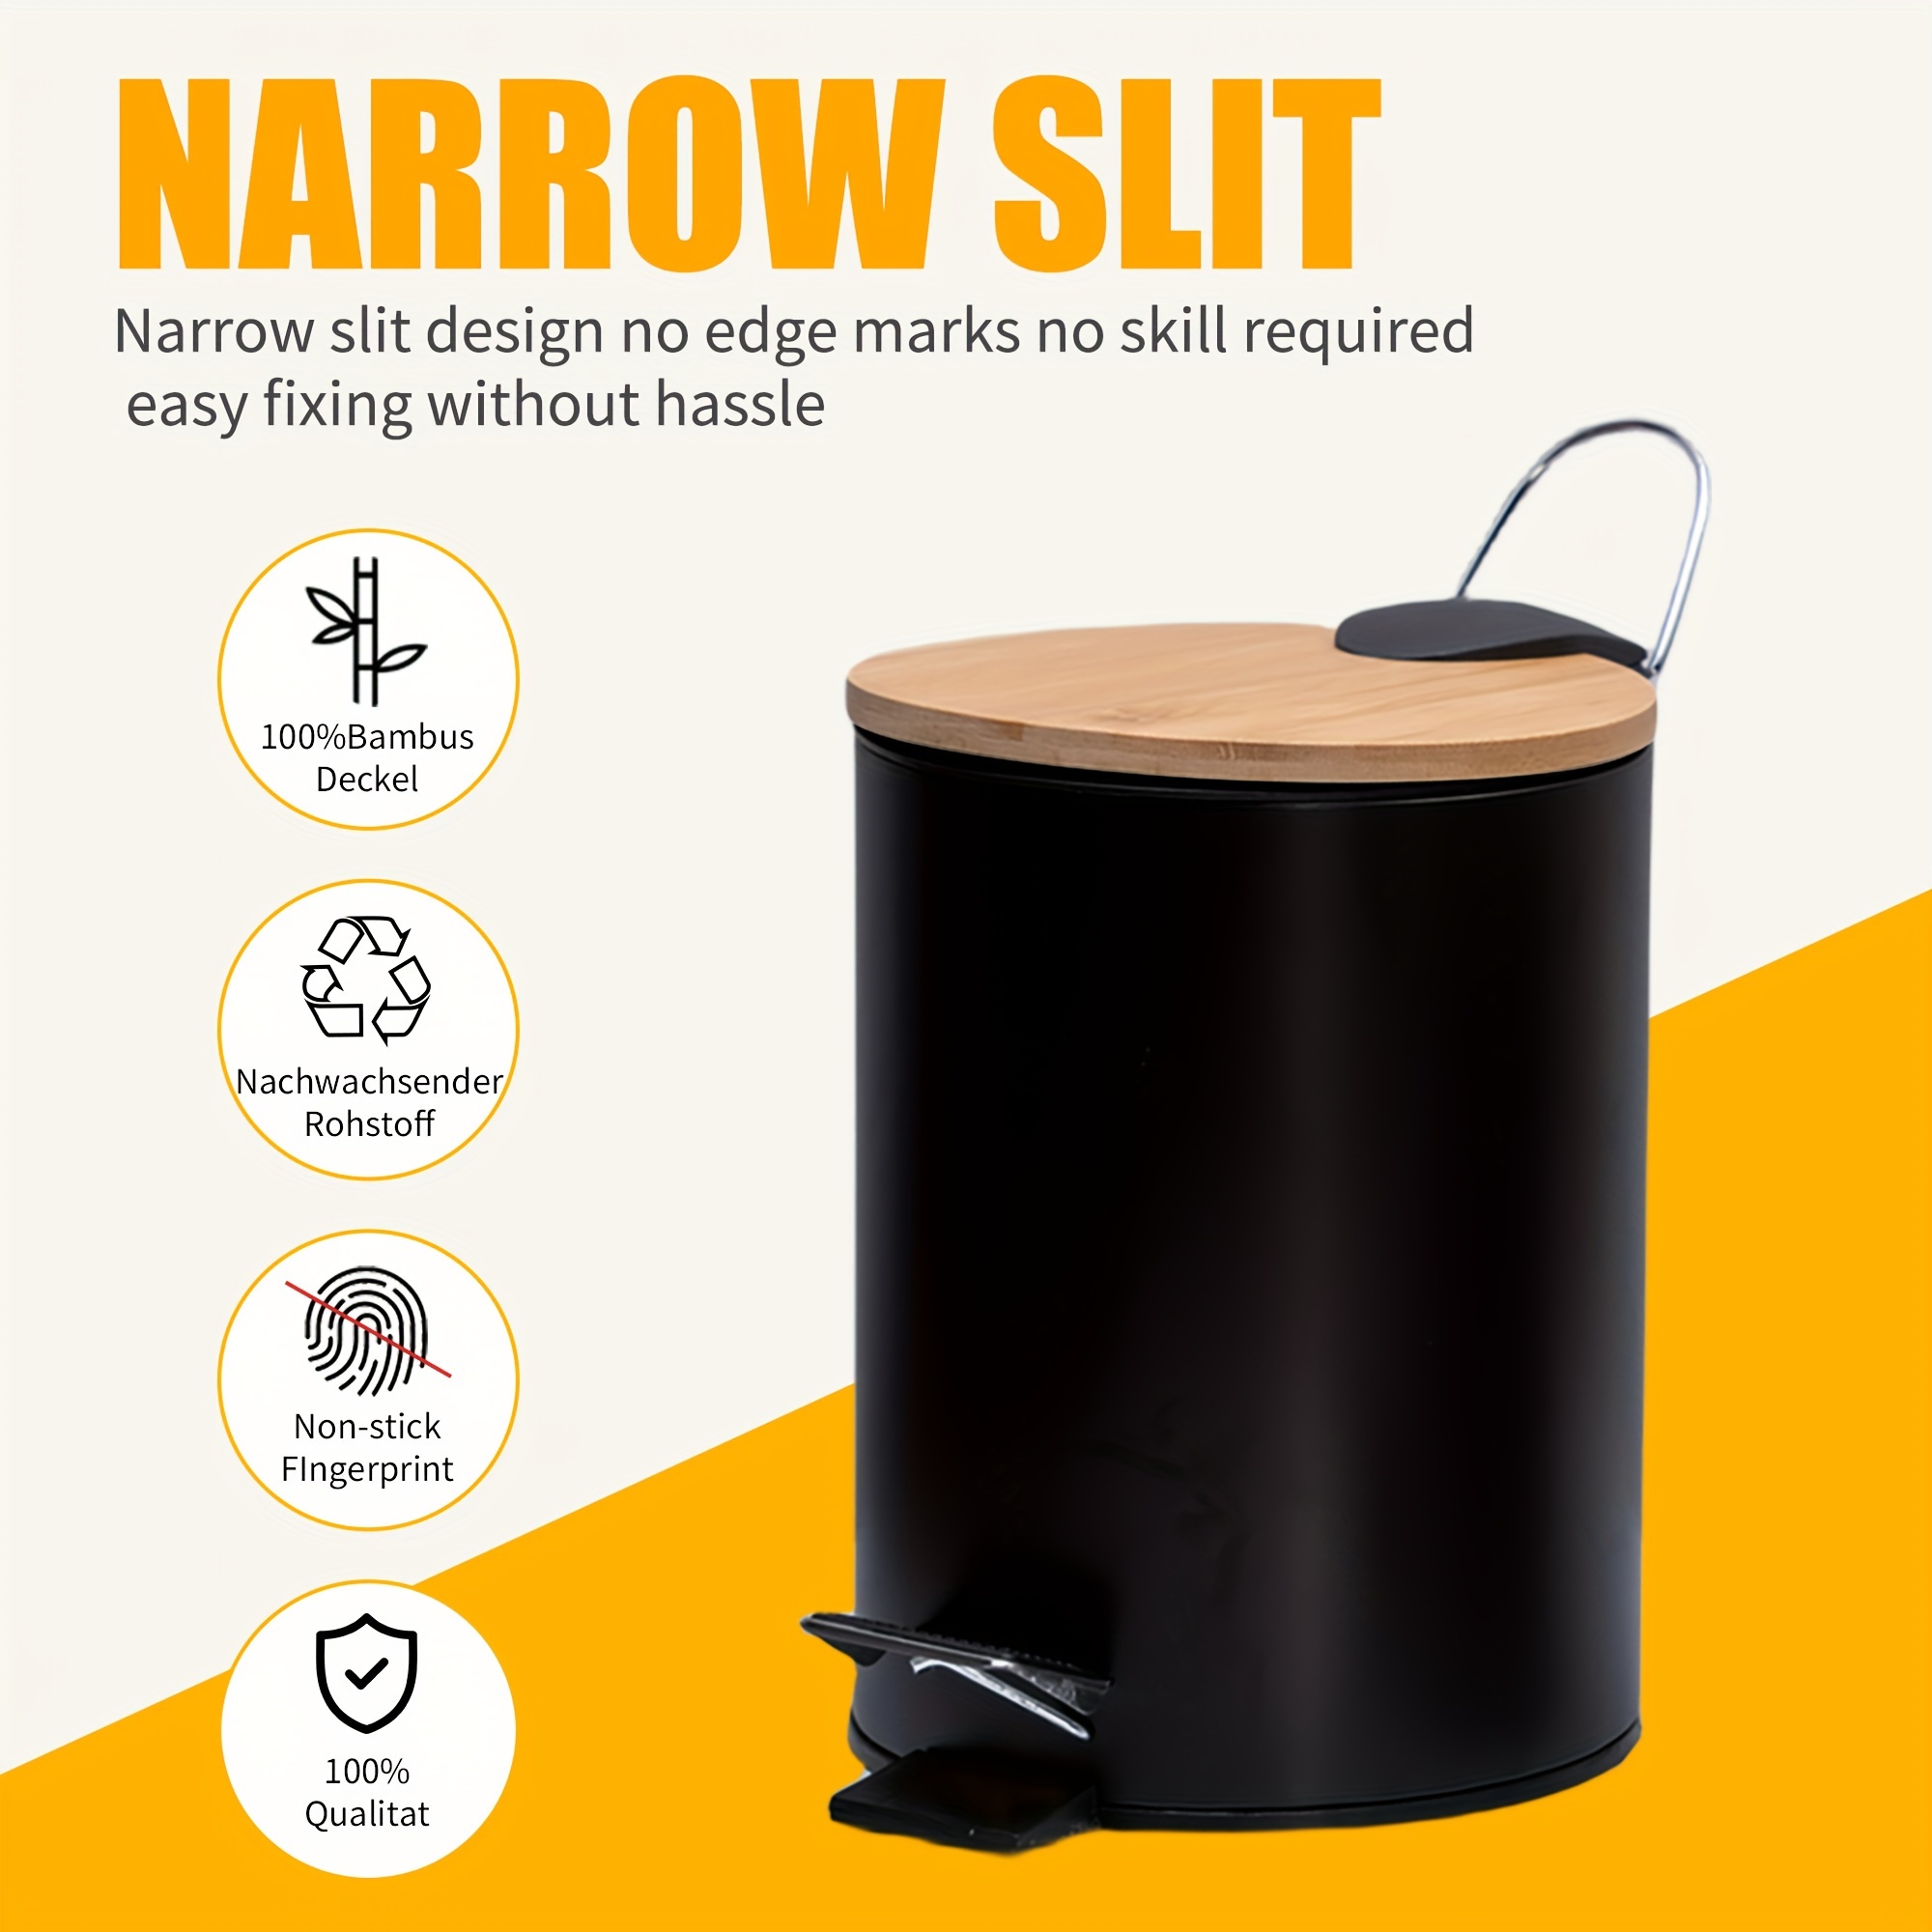 

3l Step-on Metal Trash Can With Quiet Close Lid, Cylindrical Powder Coated Waste Bin For Kitchen, Living Room, Bathroom - Bamboo Top, No-electricity Operation, Narrow Gap Design